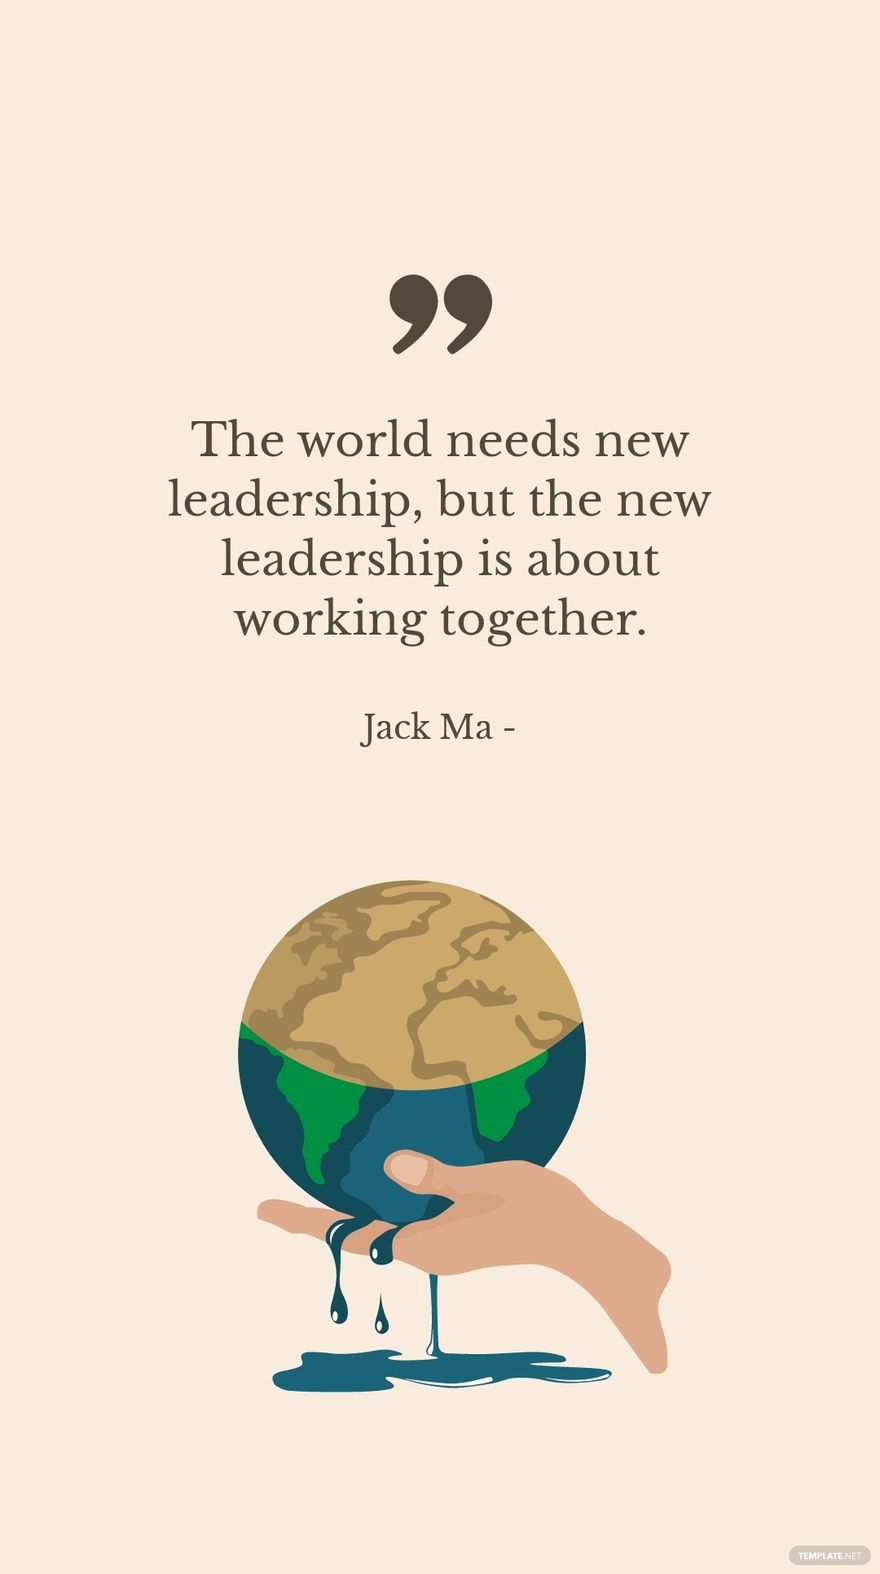 Jack Ma - The world needs new leadership, but the new leadership is about working together.